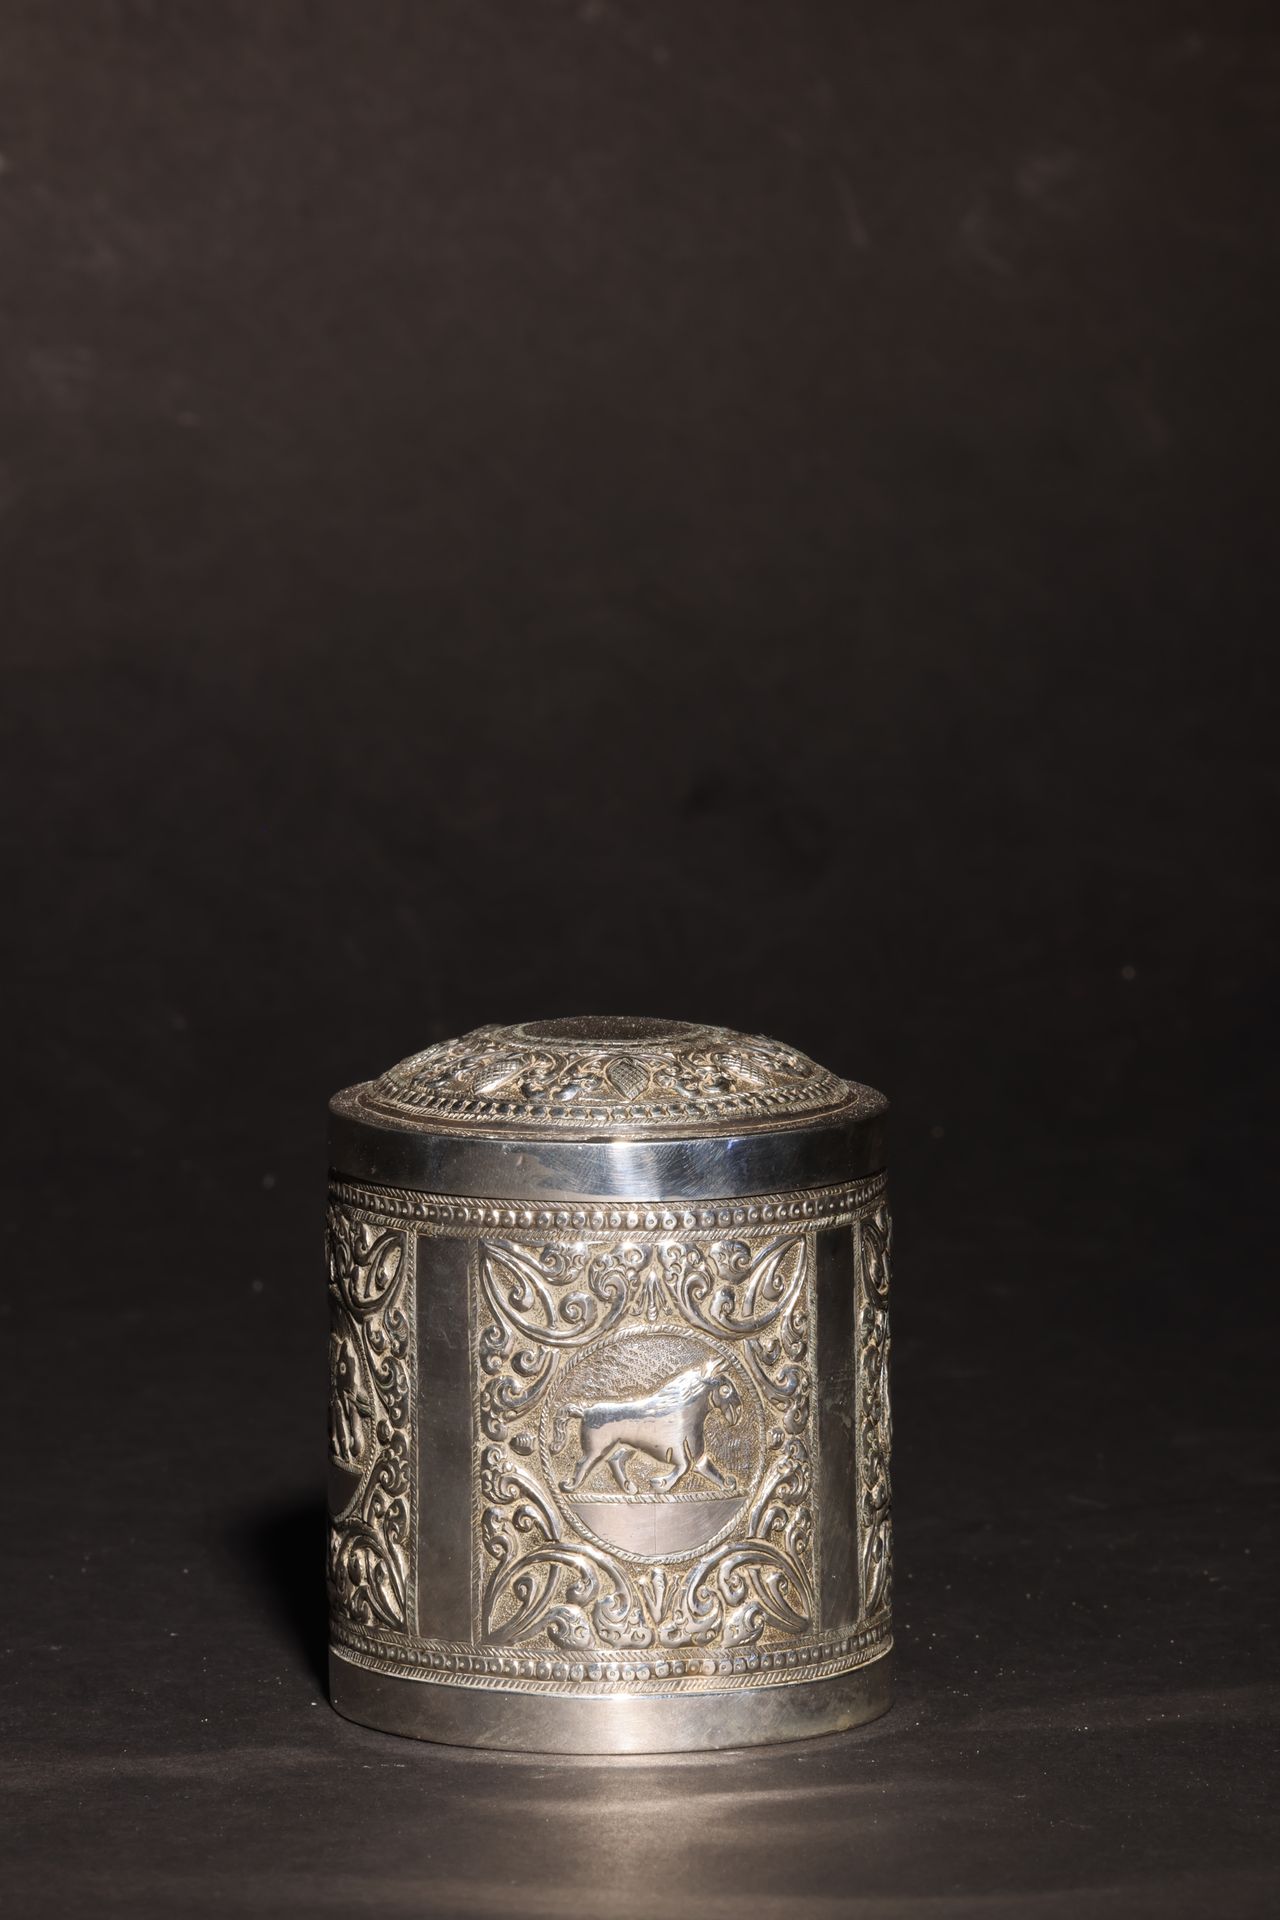 An Antique South Asian Lidded, Cylindrical Silver Casket Antiguo cofre cilíndric&hellip;